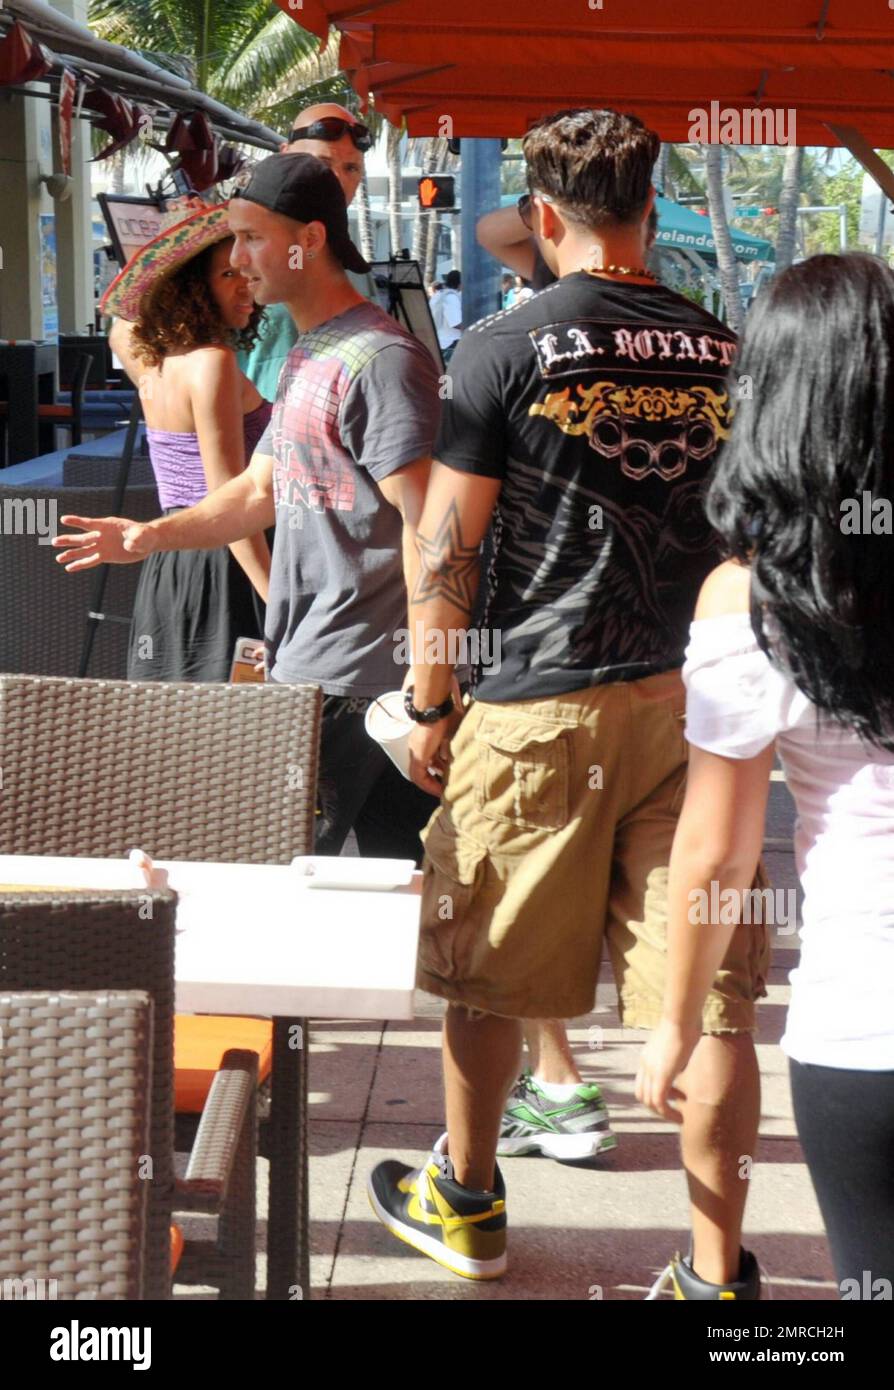 Mike 'The Situation' Sorrentino, DJ Pauly D and Angelina 'Jolie' celebrate Cinco de Mayo at a local restaurant while they film an episode of thier hit reality series, MTV's 'Jersey Shore,' in Miami Beach, FL. 5/5/10. Stock Photo